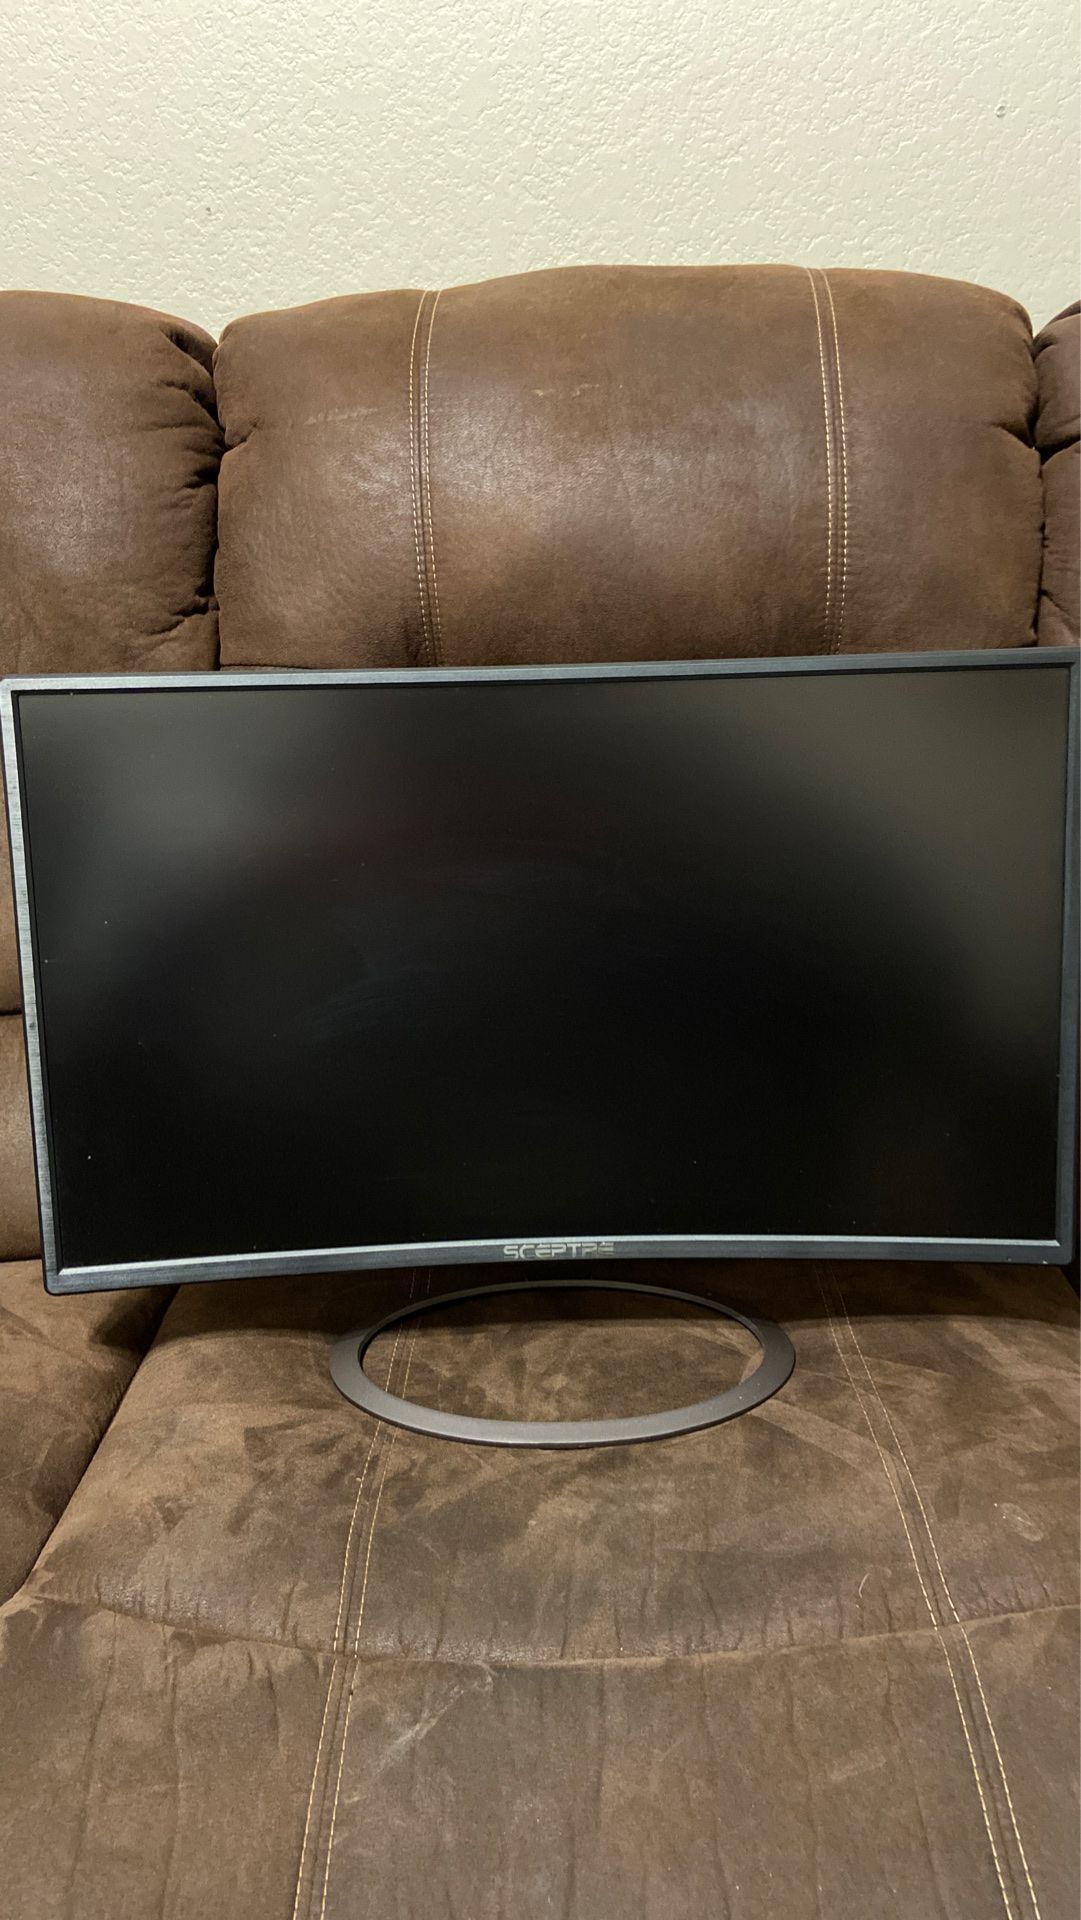 Sceptre 24inch curved monitor